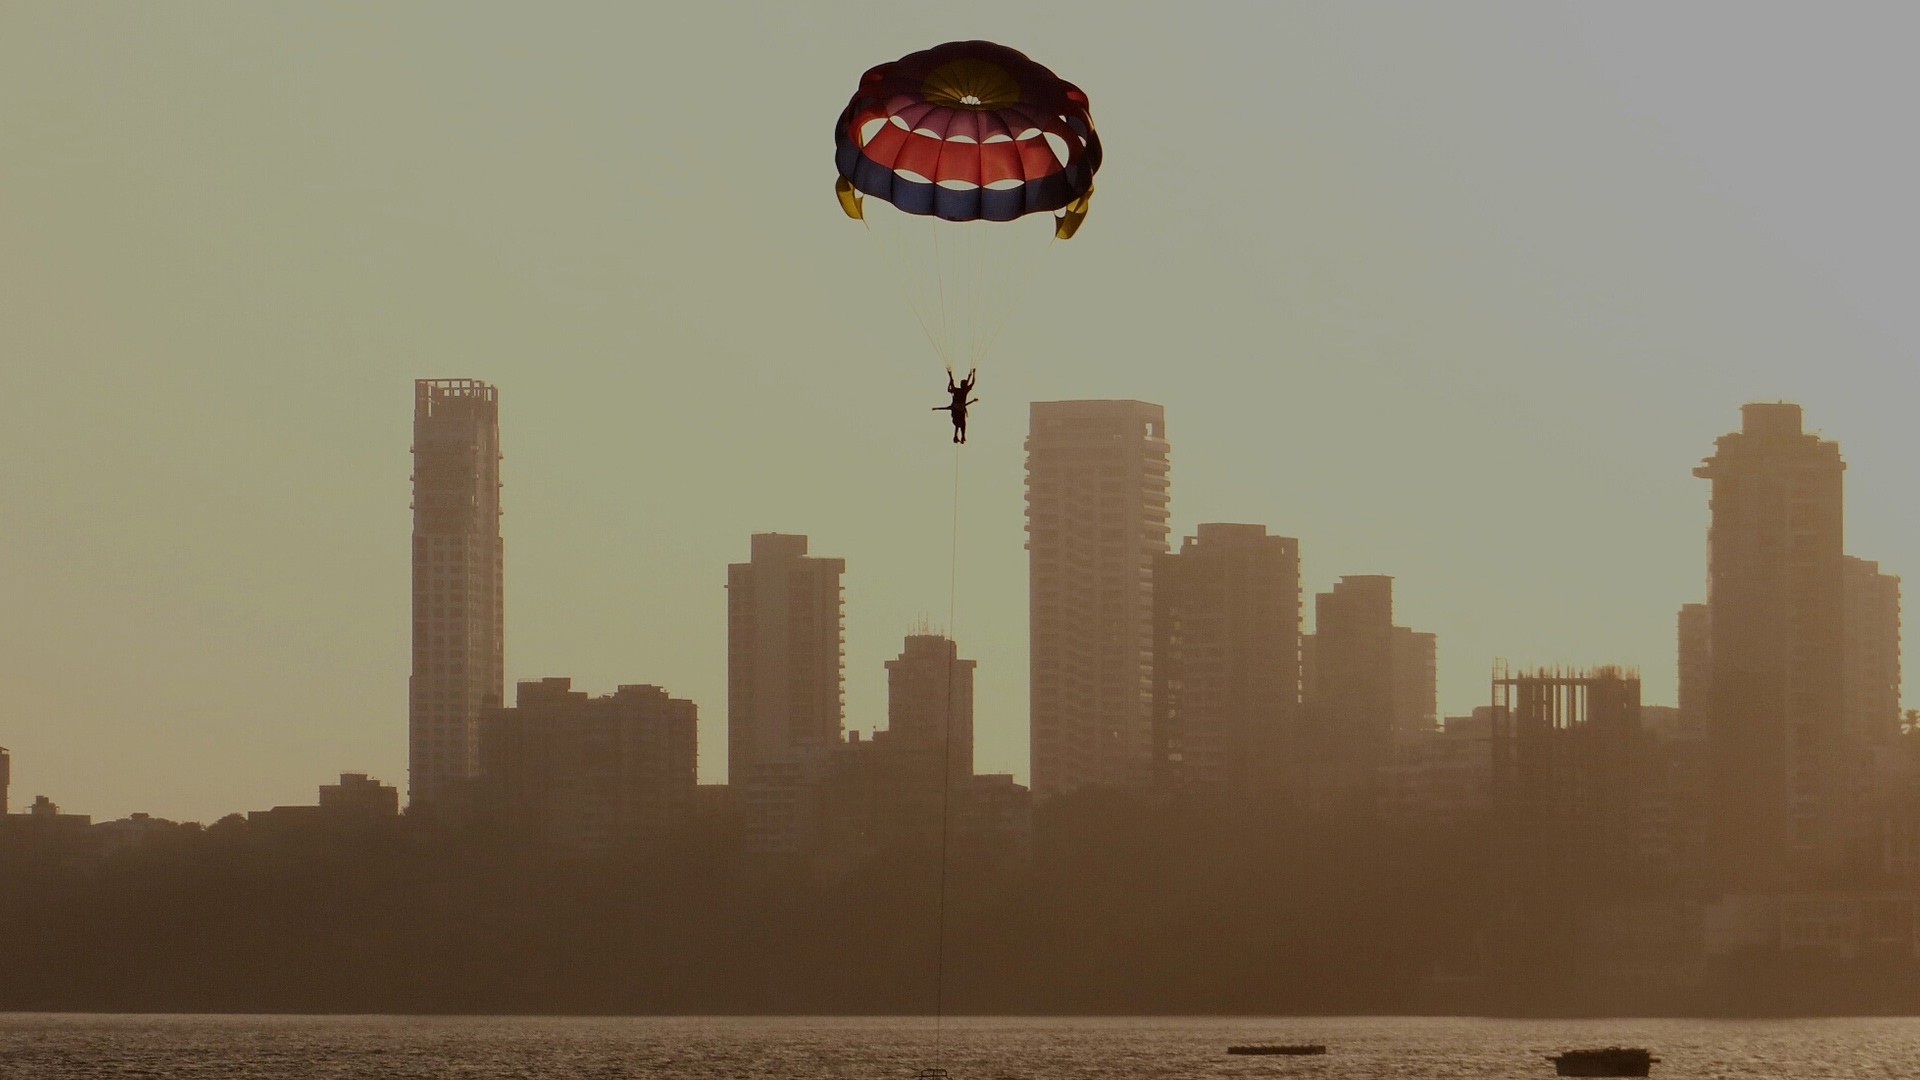 paragliding-cityscape-water-1920x1080